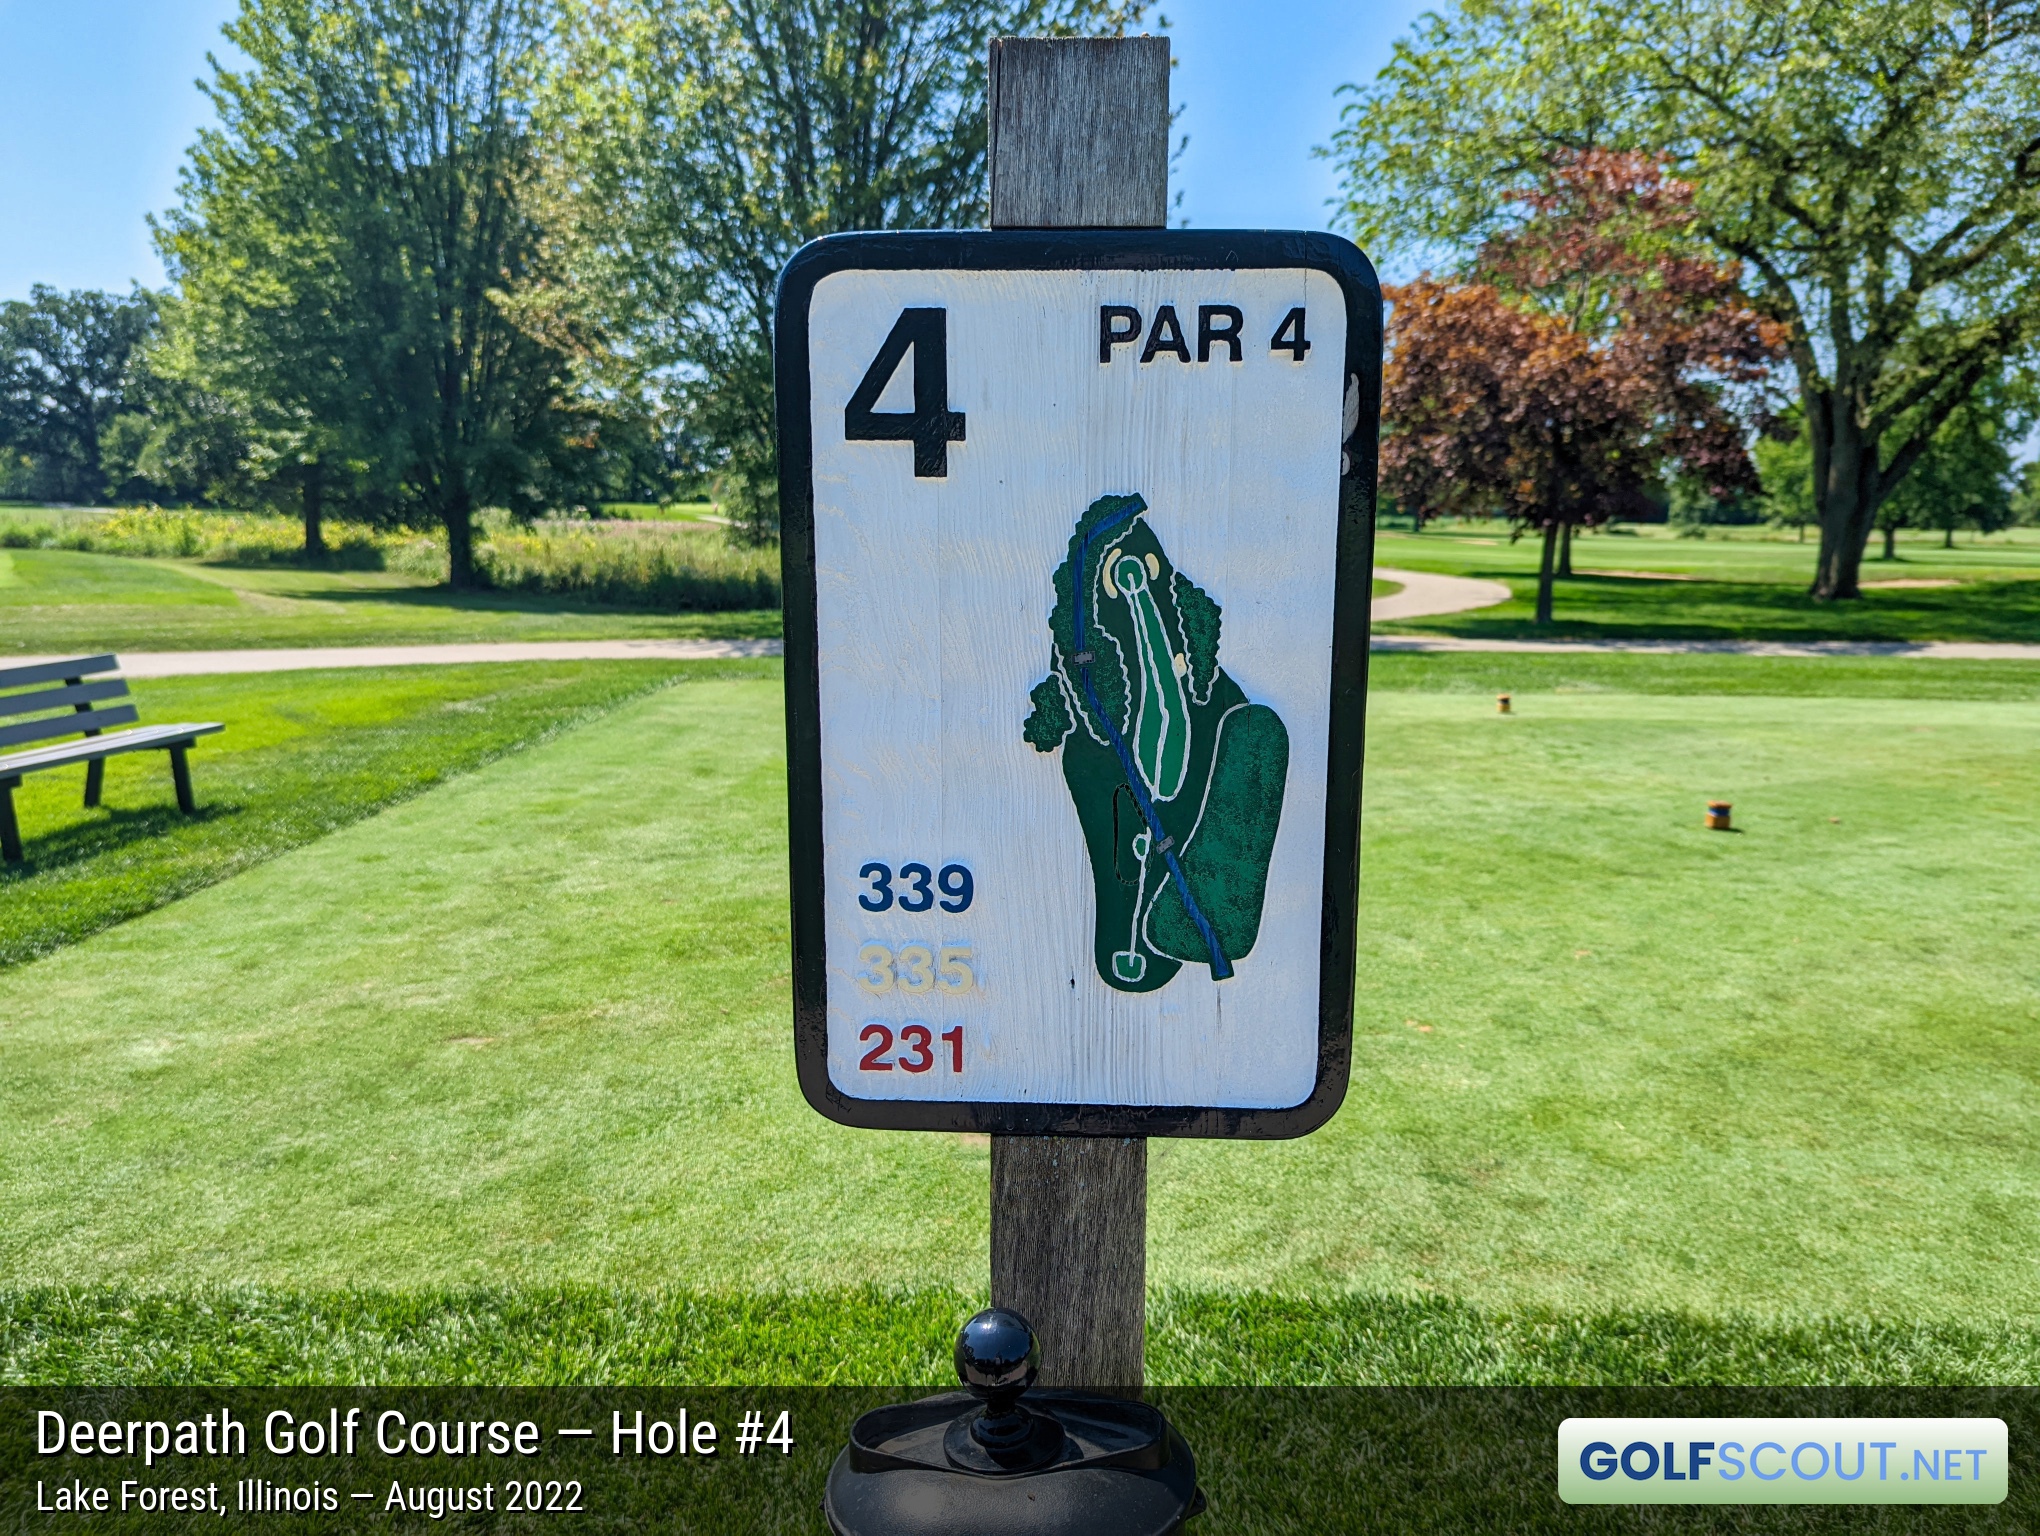 Photo of hole #4 at Deerpath Golf Course in Lake Forest, Illinois. 